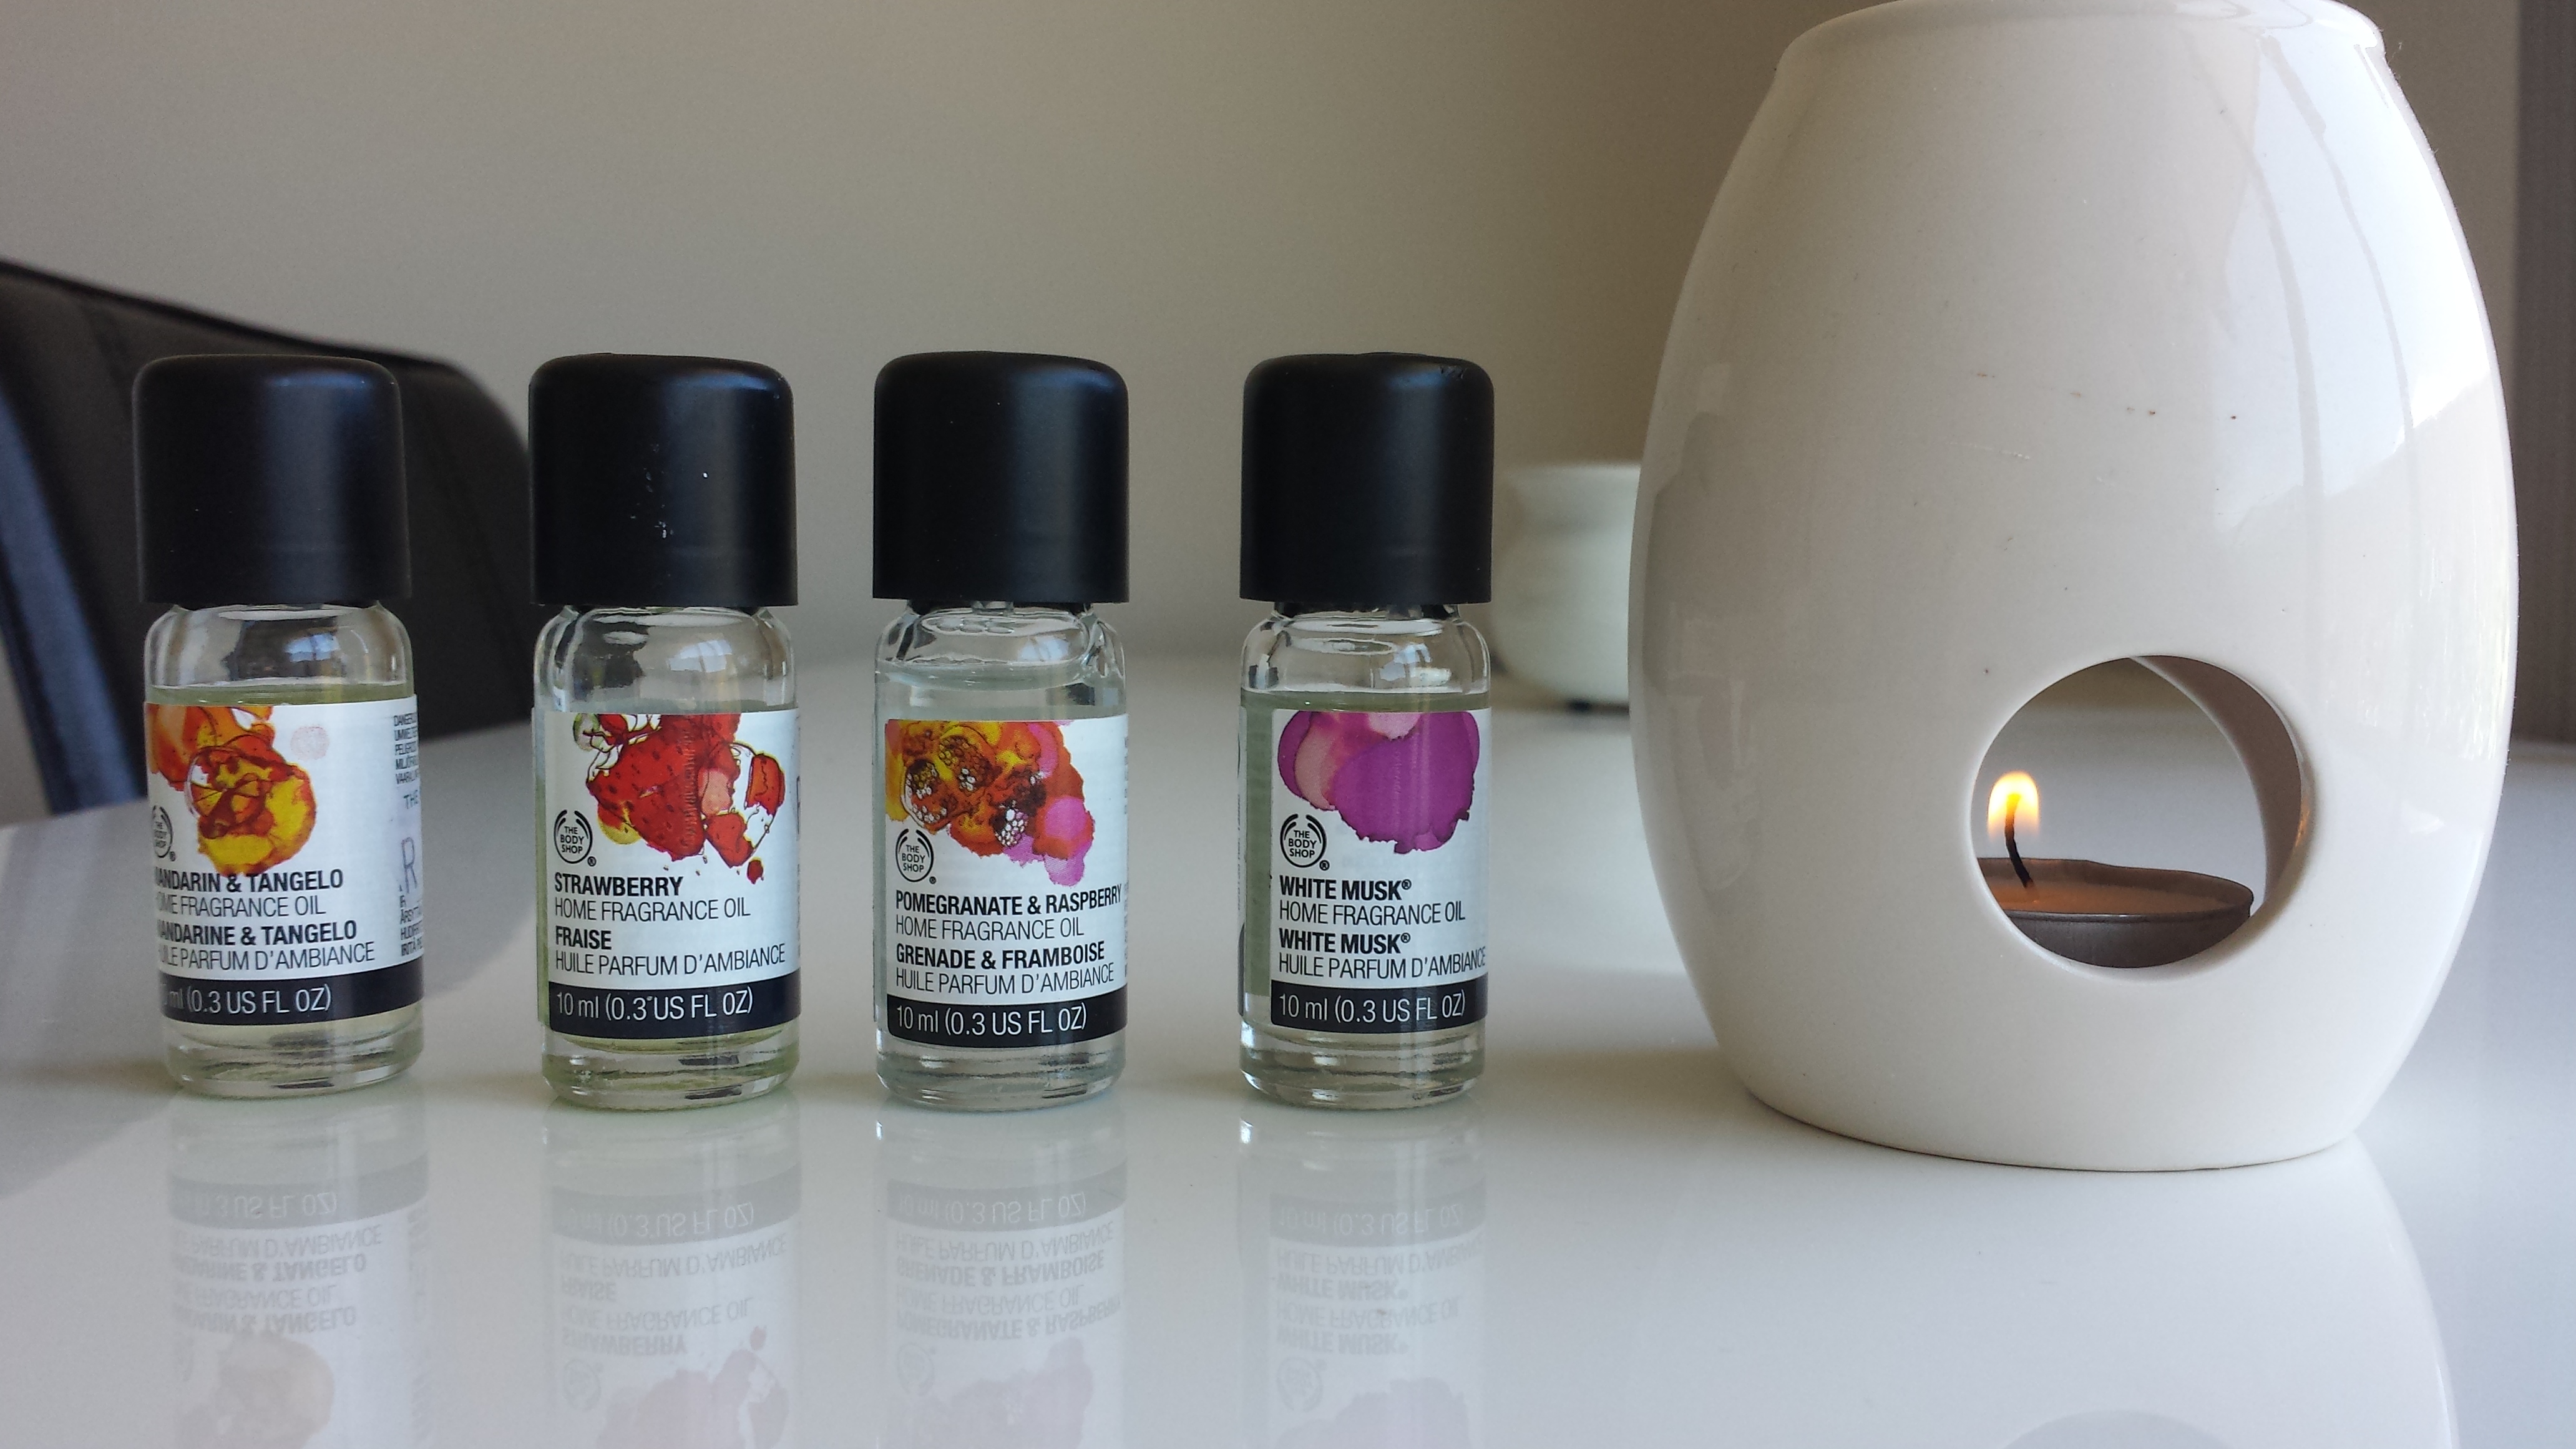 Review] The Body Shop Home Fragrance Oils